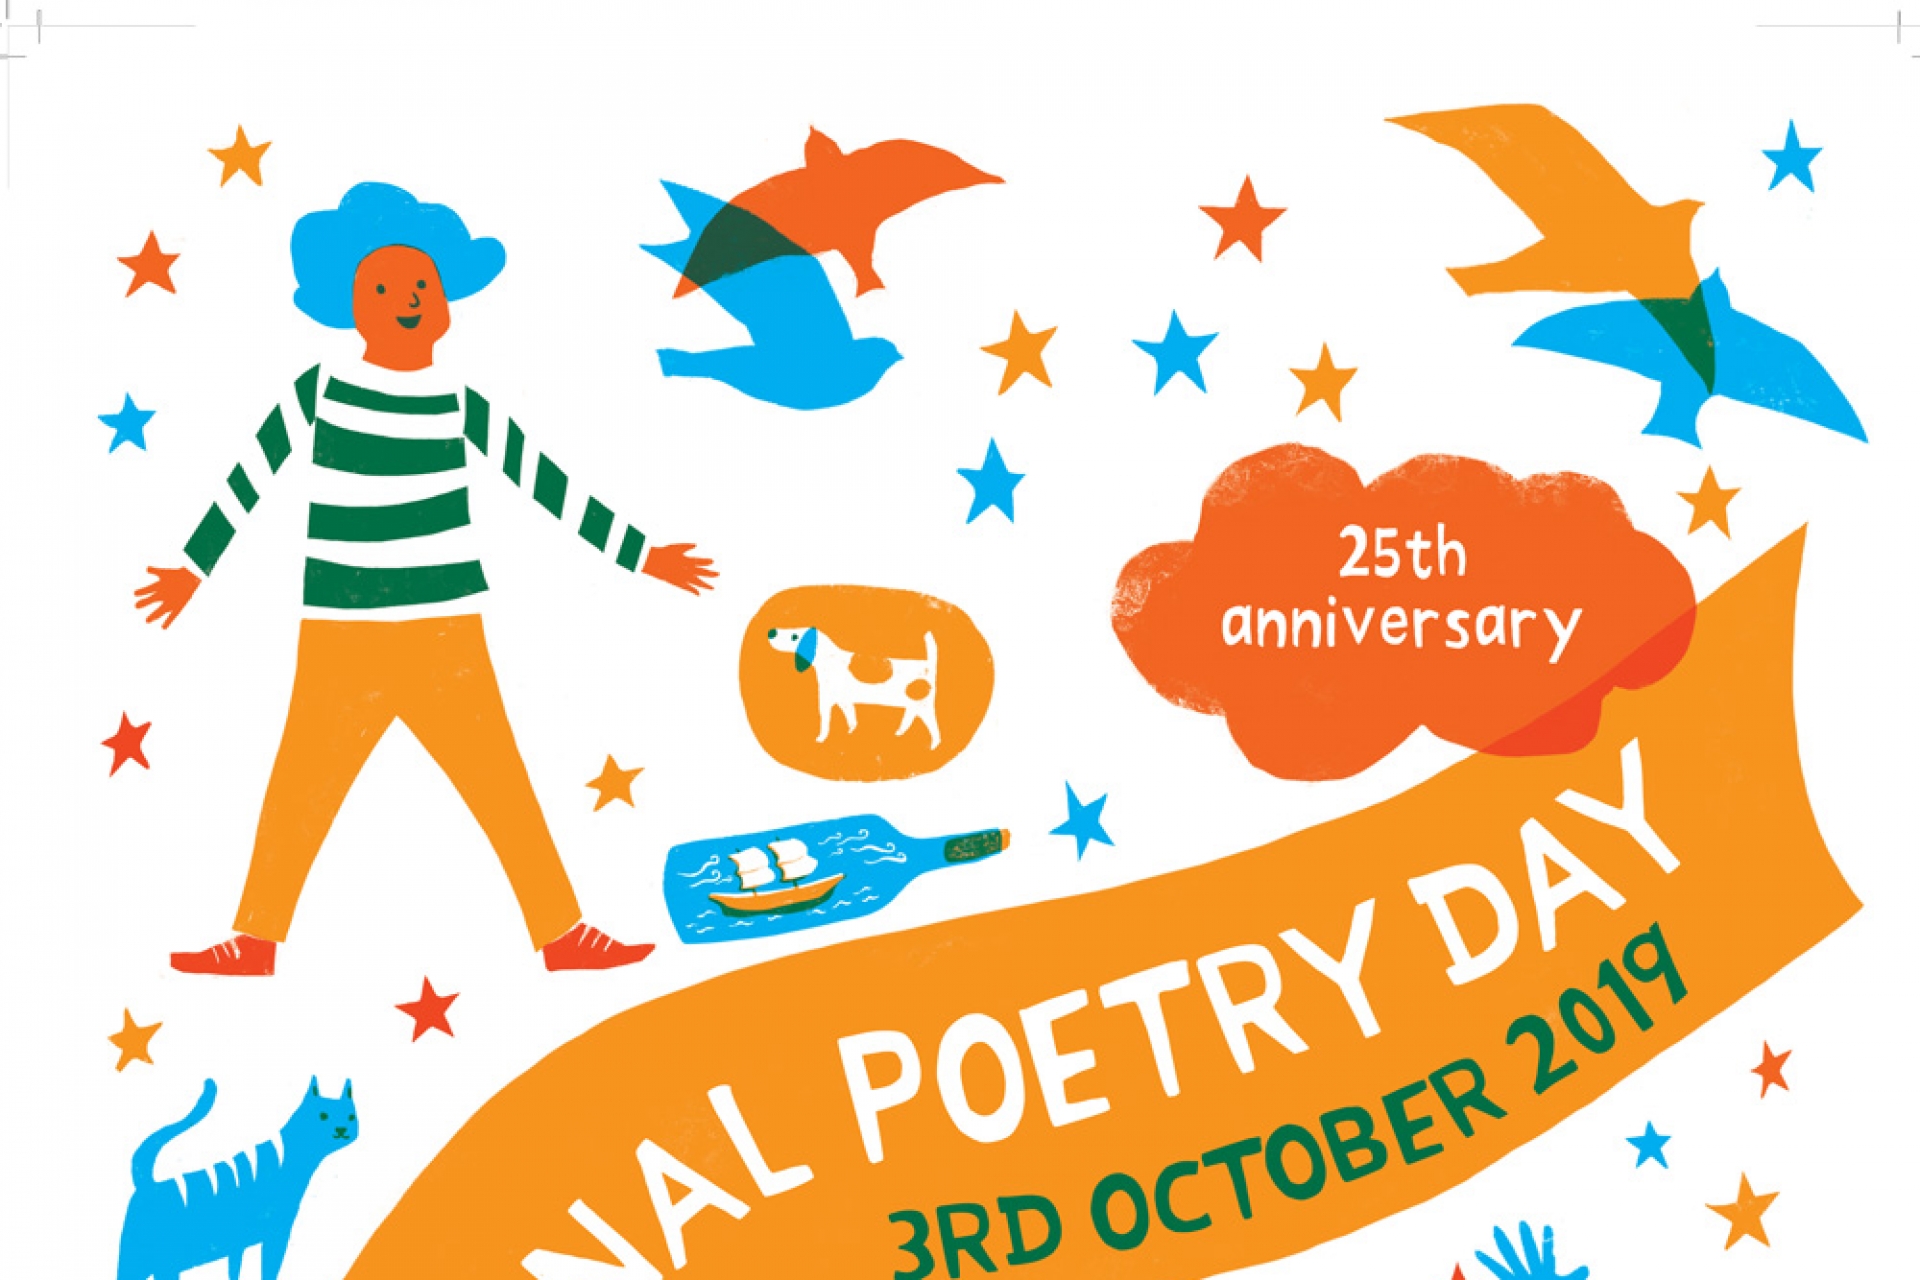 National Poetry Day - 3rd October 2019